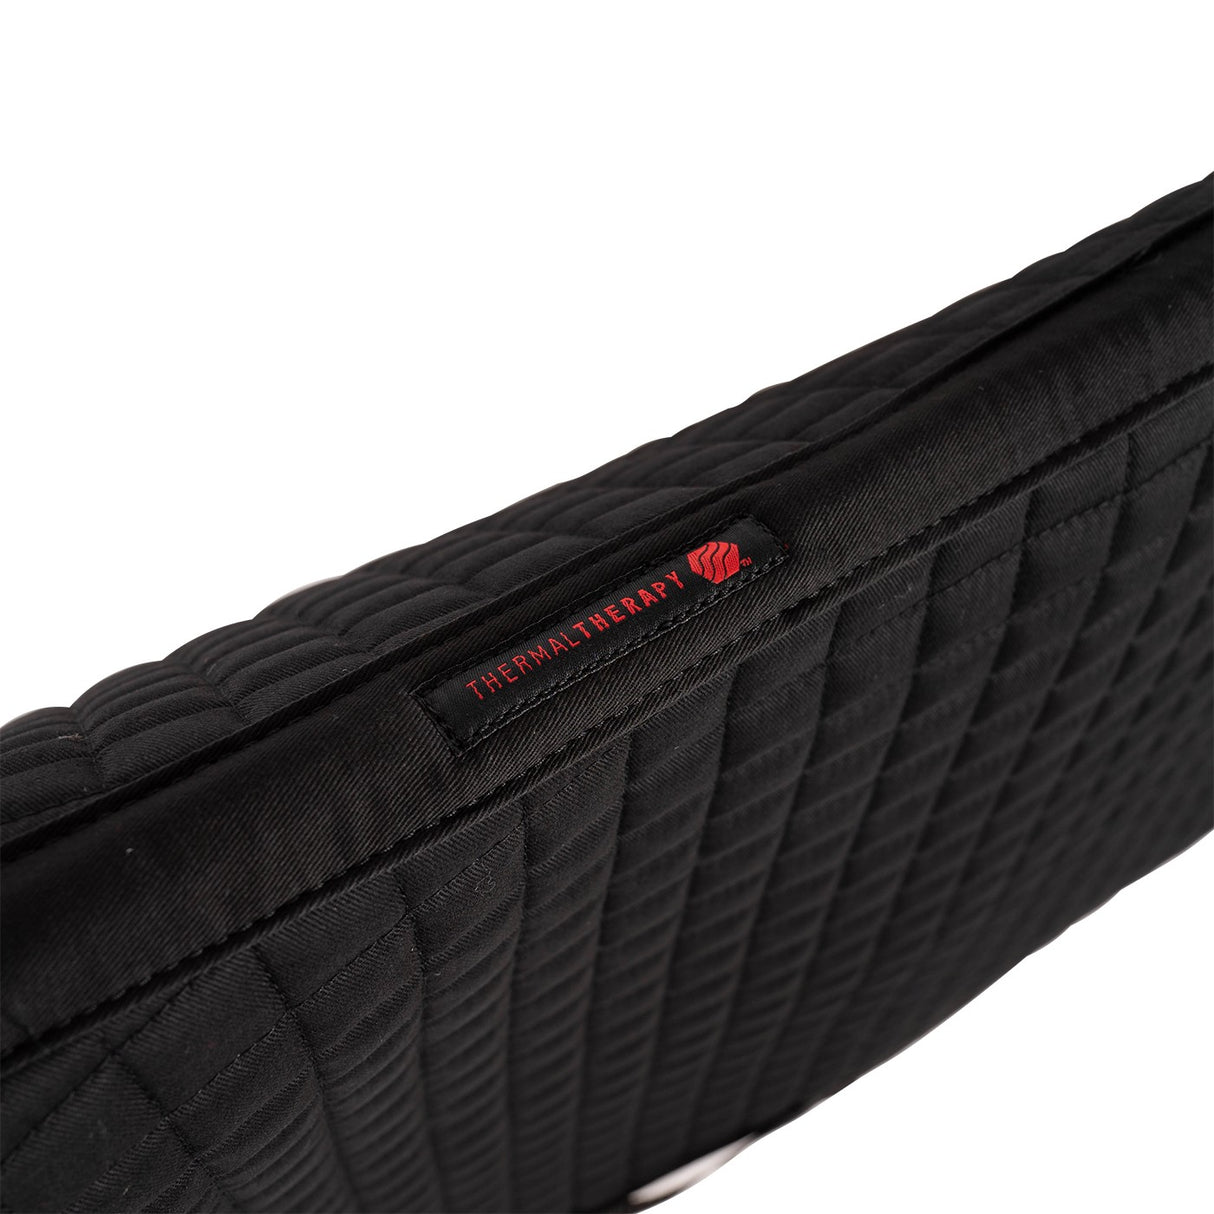 Thermal Therapy Saddle Pad